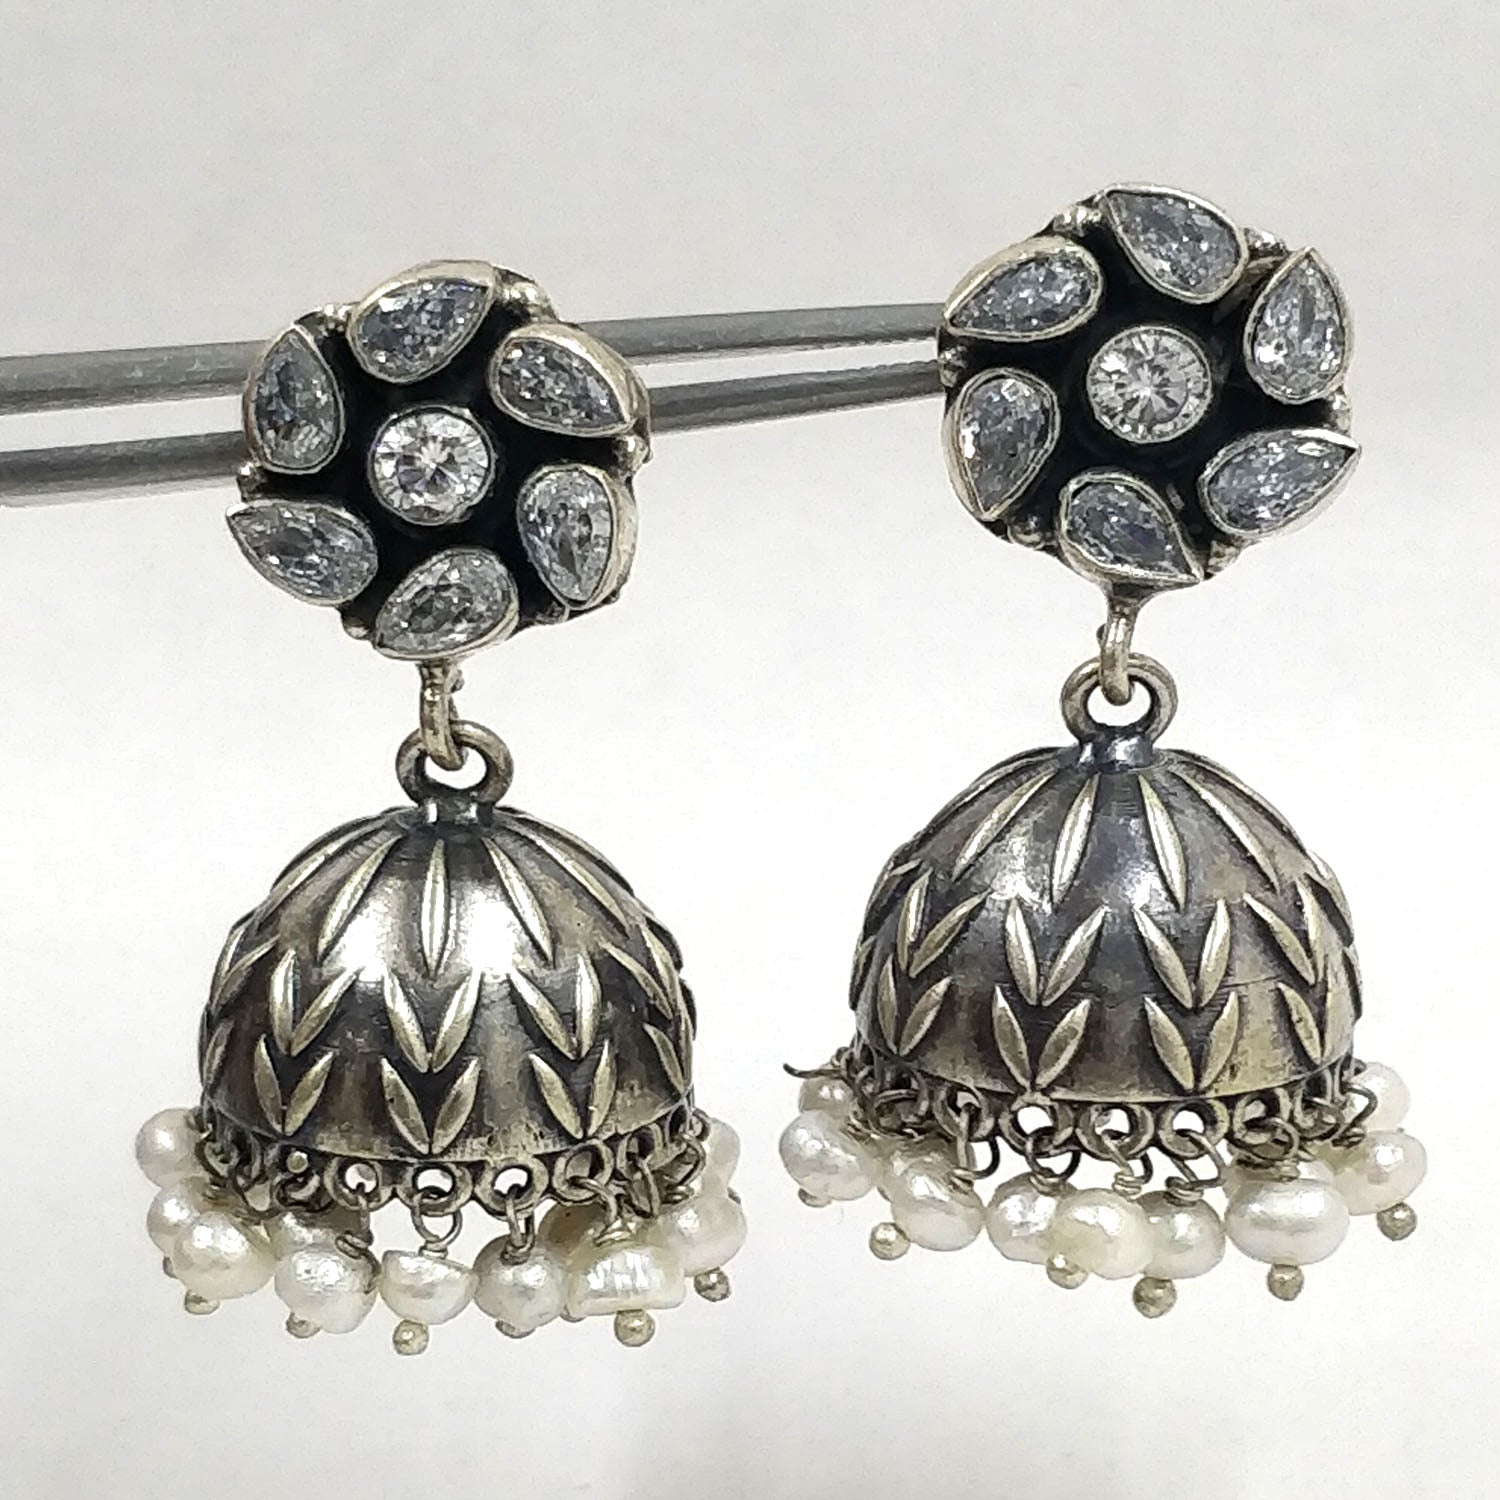 Stunning Silver Jhumka Earrings. Crafted from 925 sterling silver, these oxidized earrings add timeless allure.